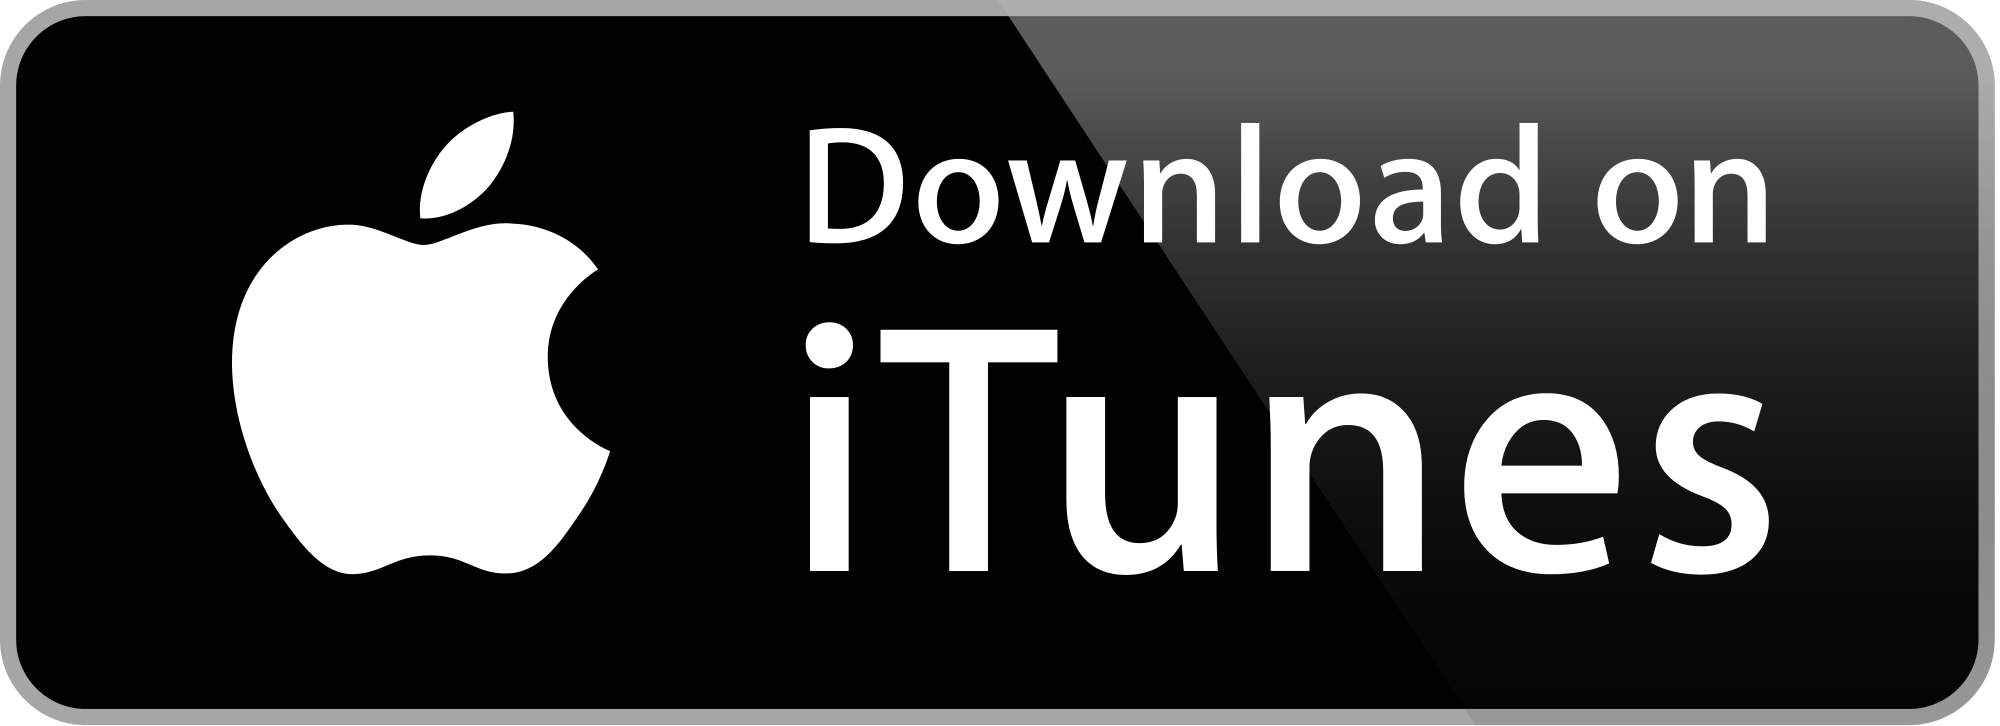 2000px-Download_on_iTunes-svg.png